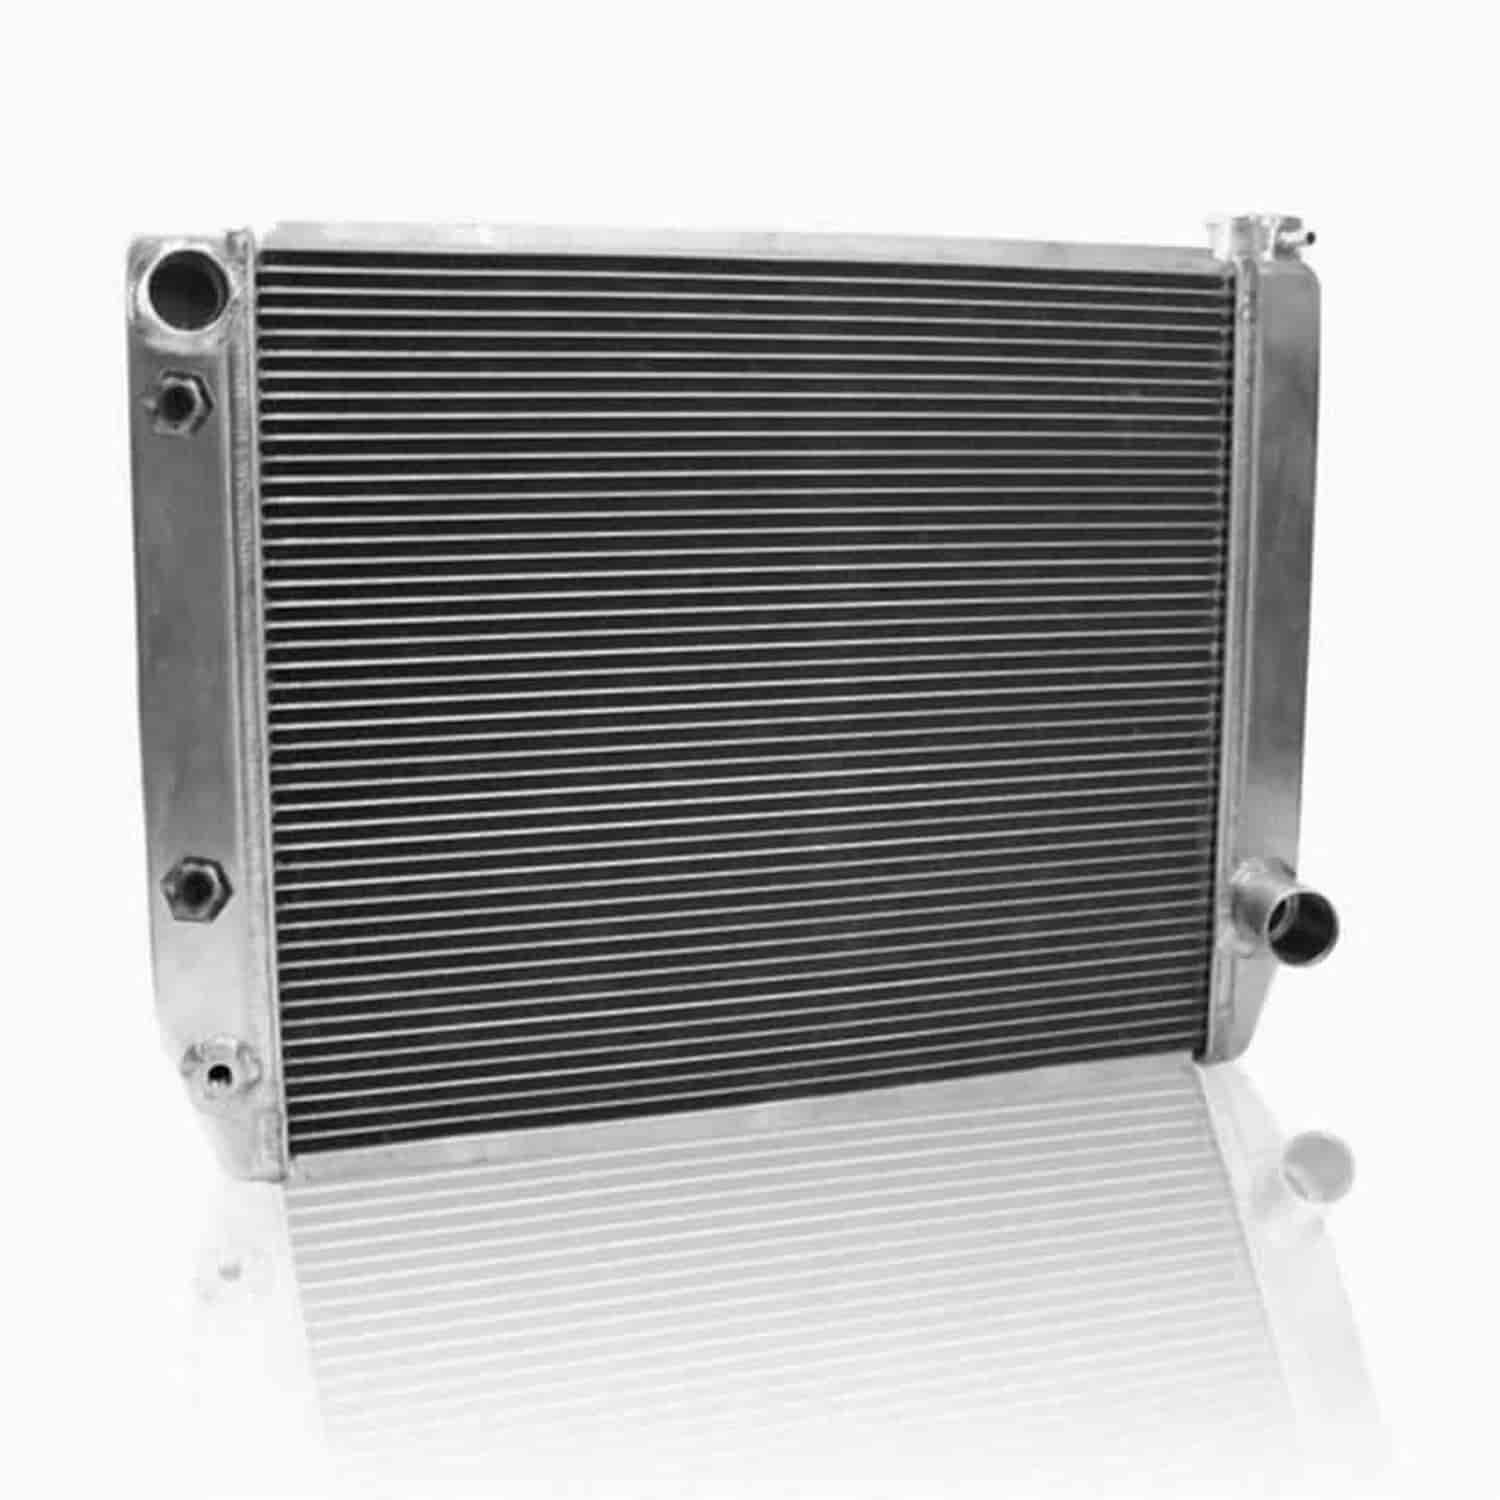 ClassicCool Universal Fit Radiator Single Pass Crossflow Design 26" x 19" with Transmission Cooler